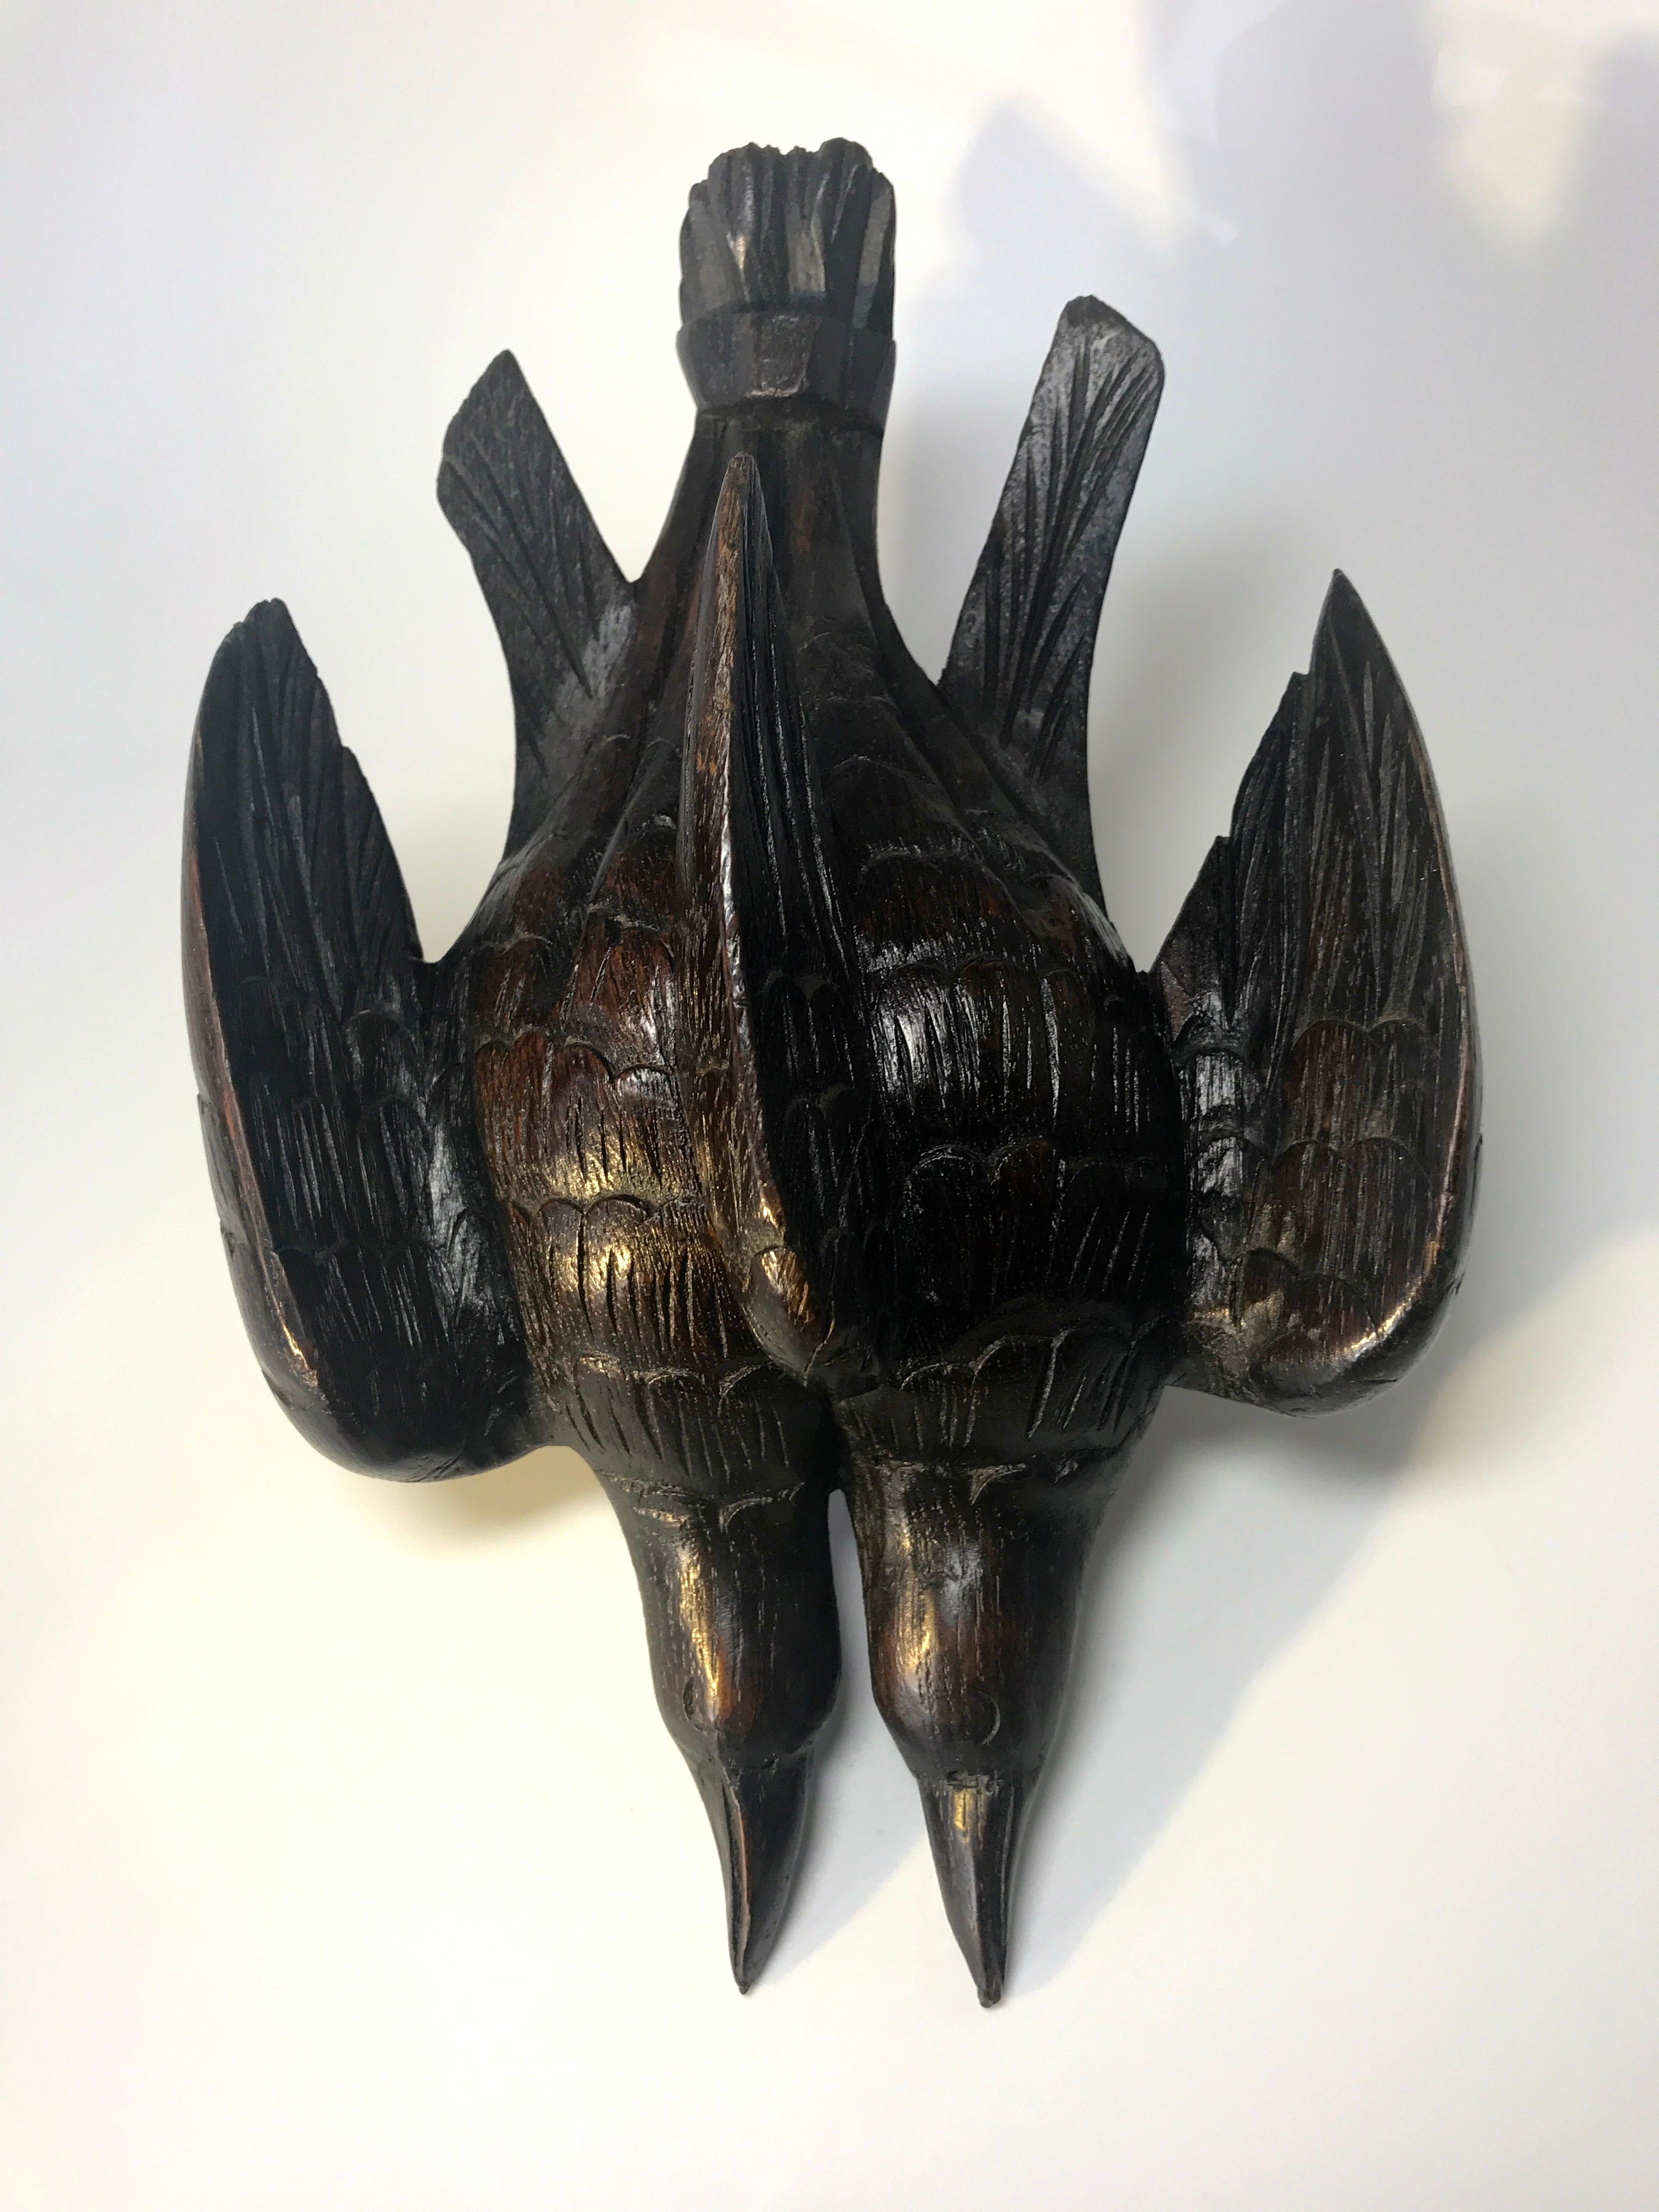 Antique Black Forest wall decoration of a pair of hand carved hunter's game birds hanging
Dark rich oak patina and super hand carved detailing
Hanging ring on reverse
circa 1920
Measures: Height 10.25 inch, width 7 inch
In very good condition.